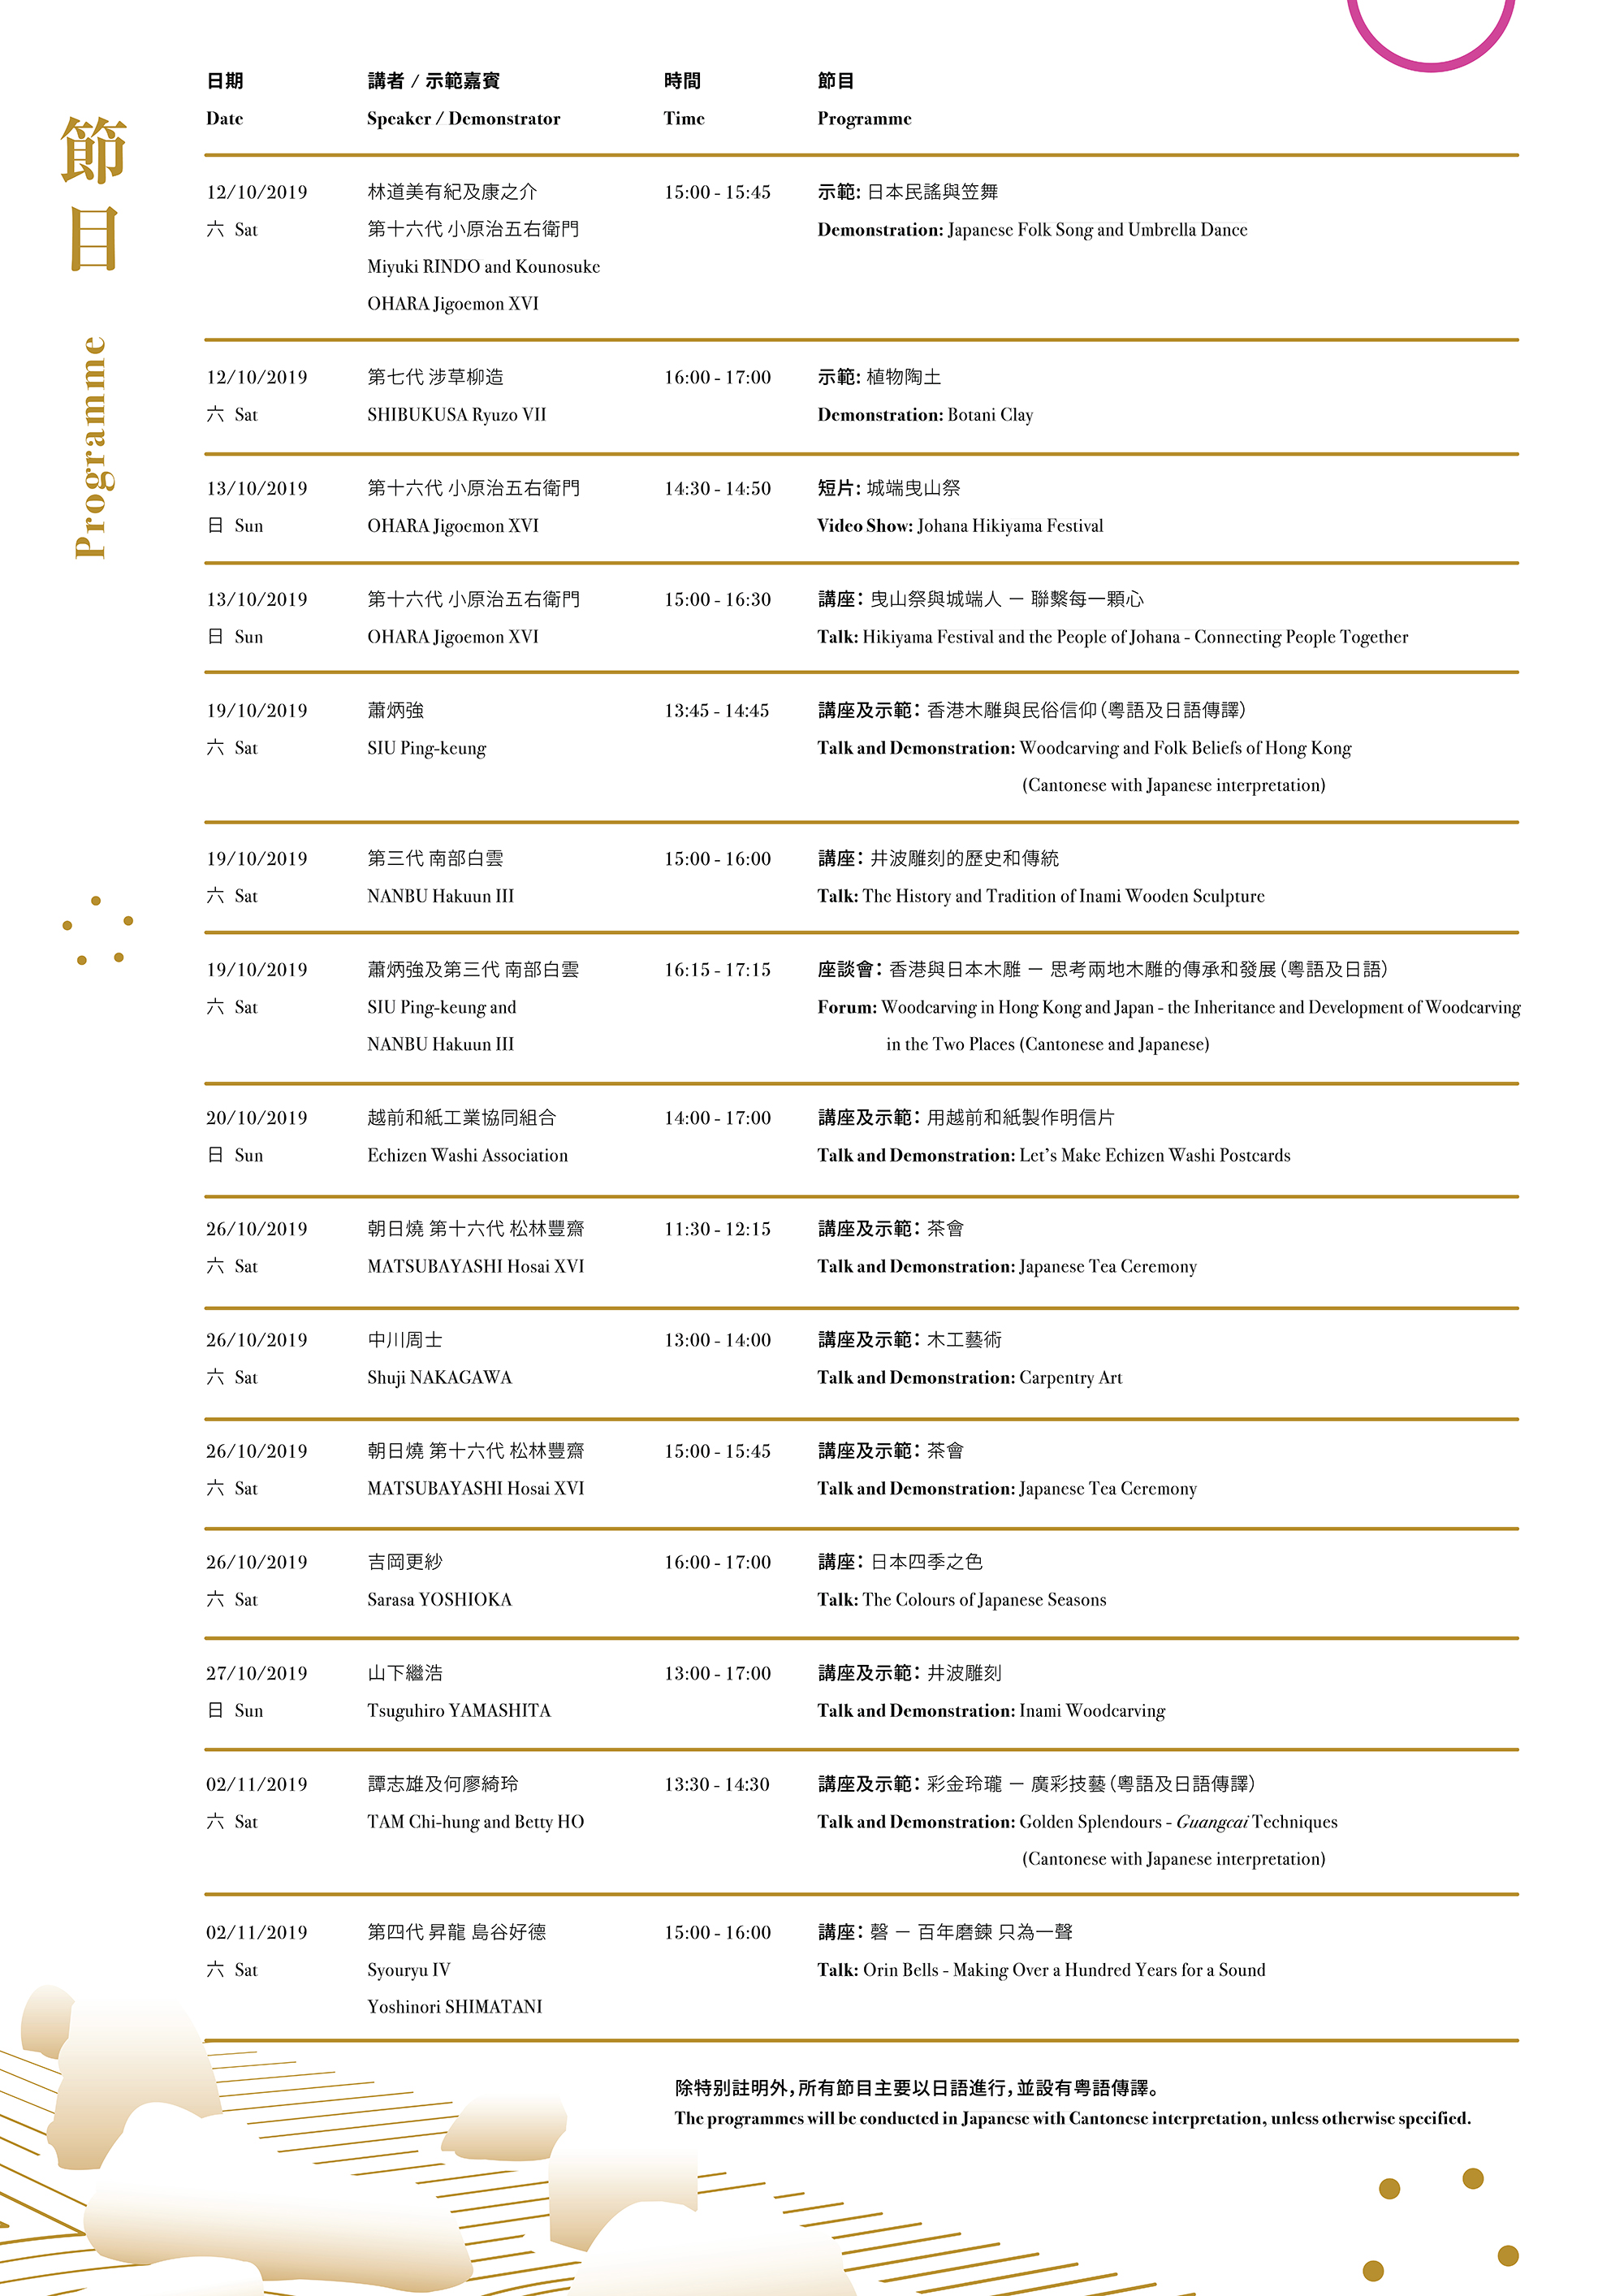 Inheritance – The Intangible Cultural Heritage of Japan Exhibition Programme Schedule